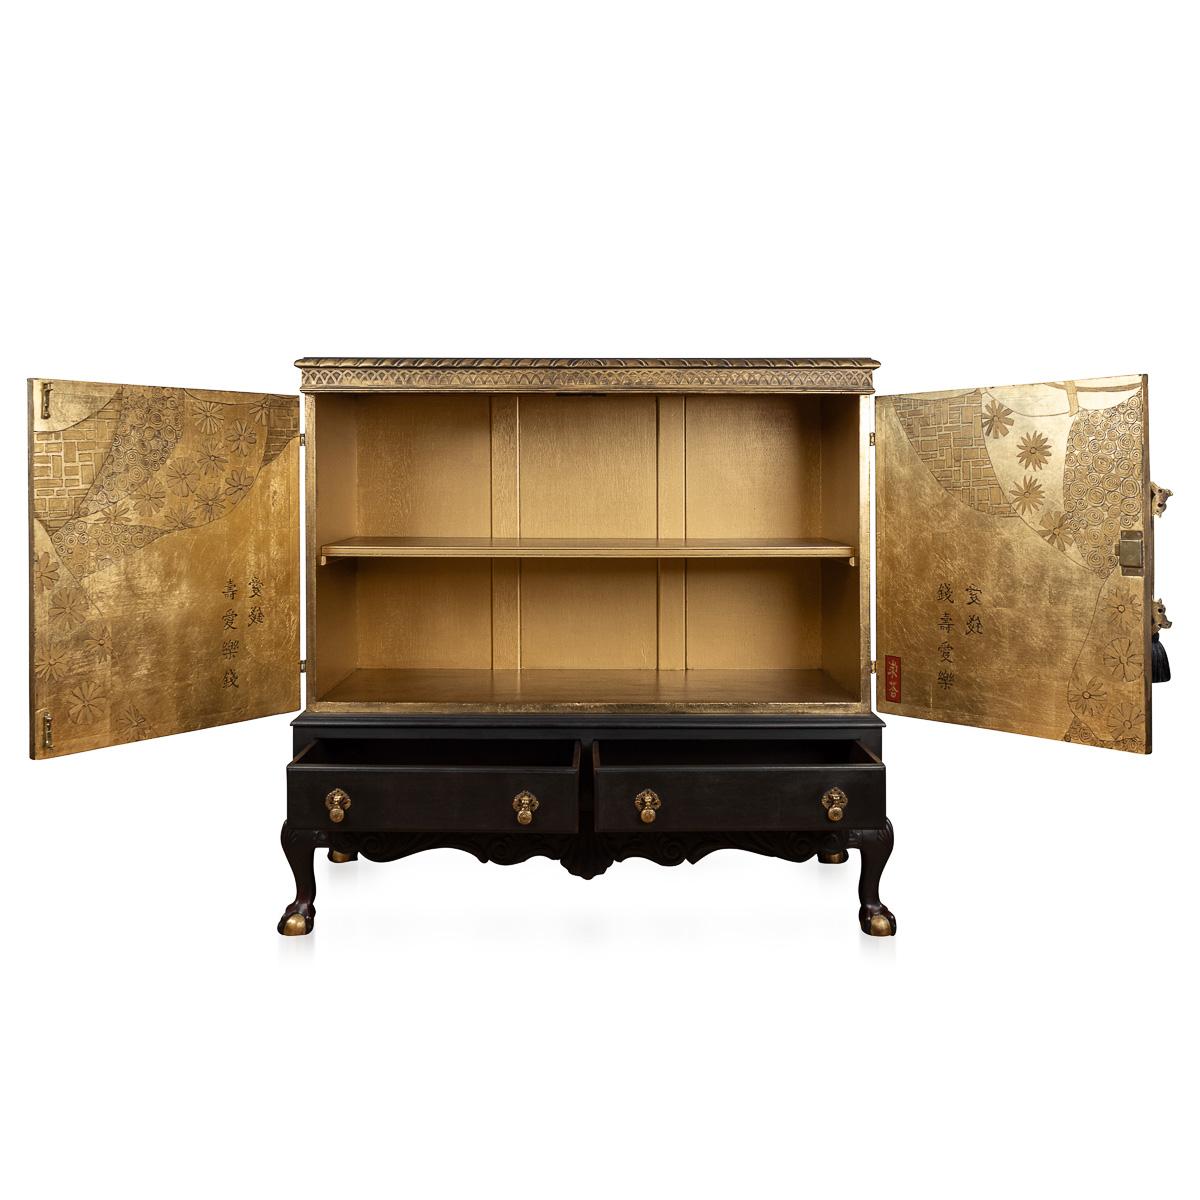 This exquisite cabinet, crafted from indigenous hardwood originating in Madagascar, showcases a captivating blend of artistry and craftsmanship. The substantial piece consists of two components: the cabinet itself, elegantly resting on a frame that